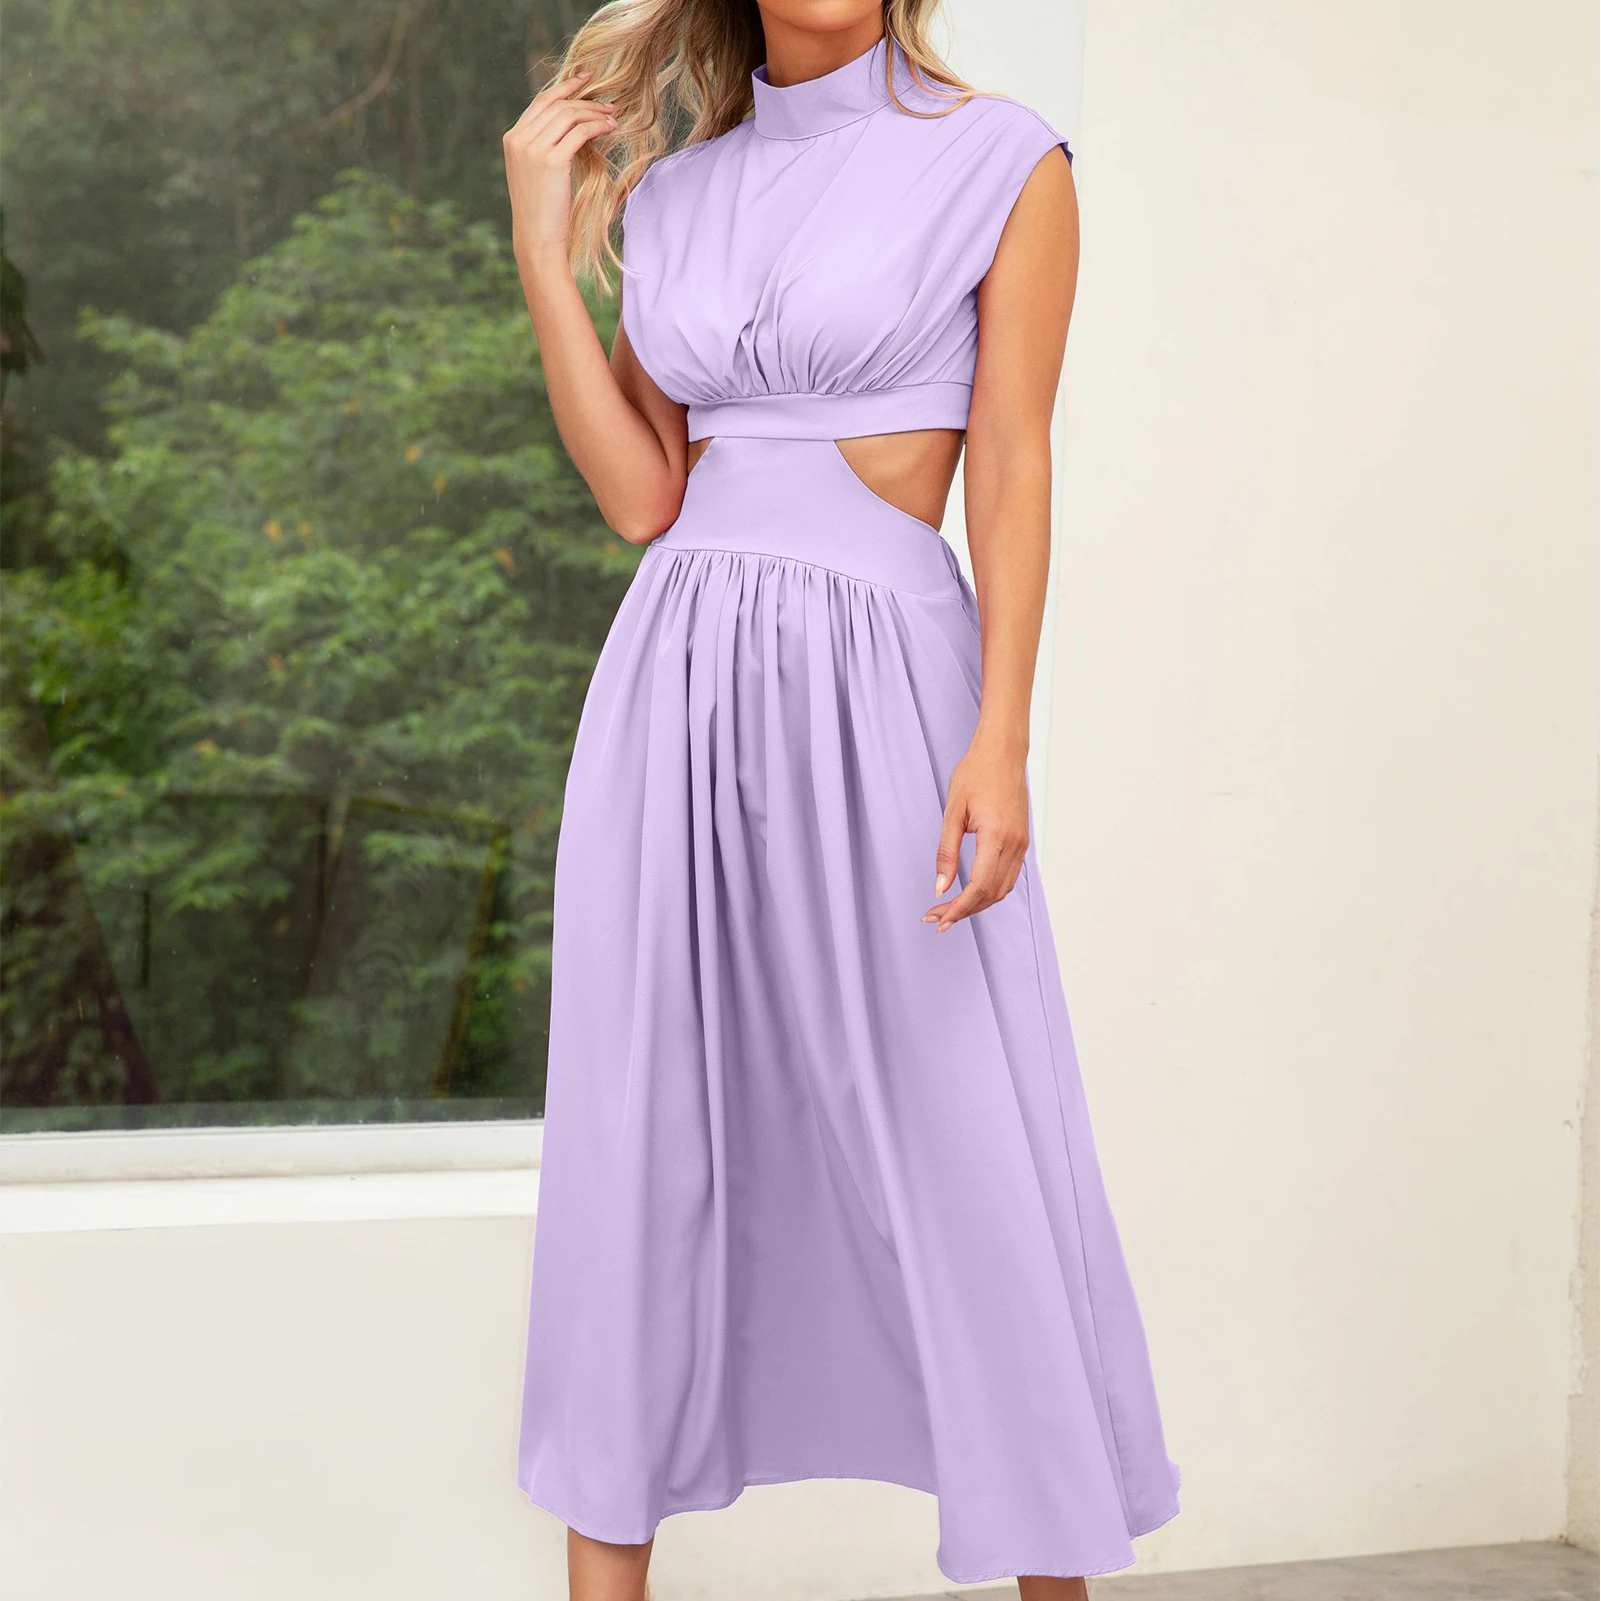 

Summer Maxi Dress Boho Style Women Sexy Tiered Dress Cutout Waist Solid Color Short Sleeve Cocktail Party Clothing